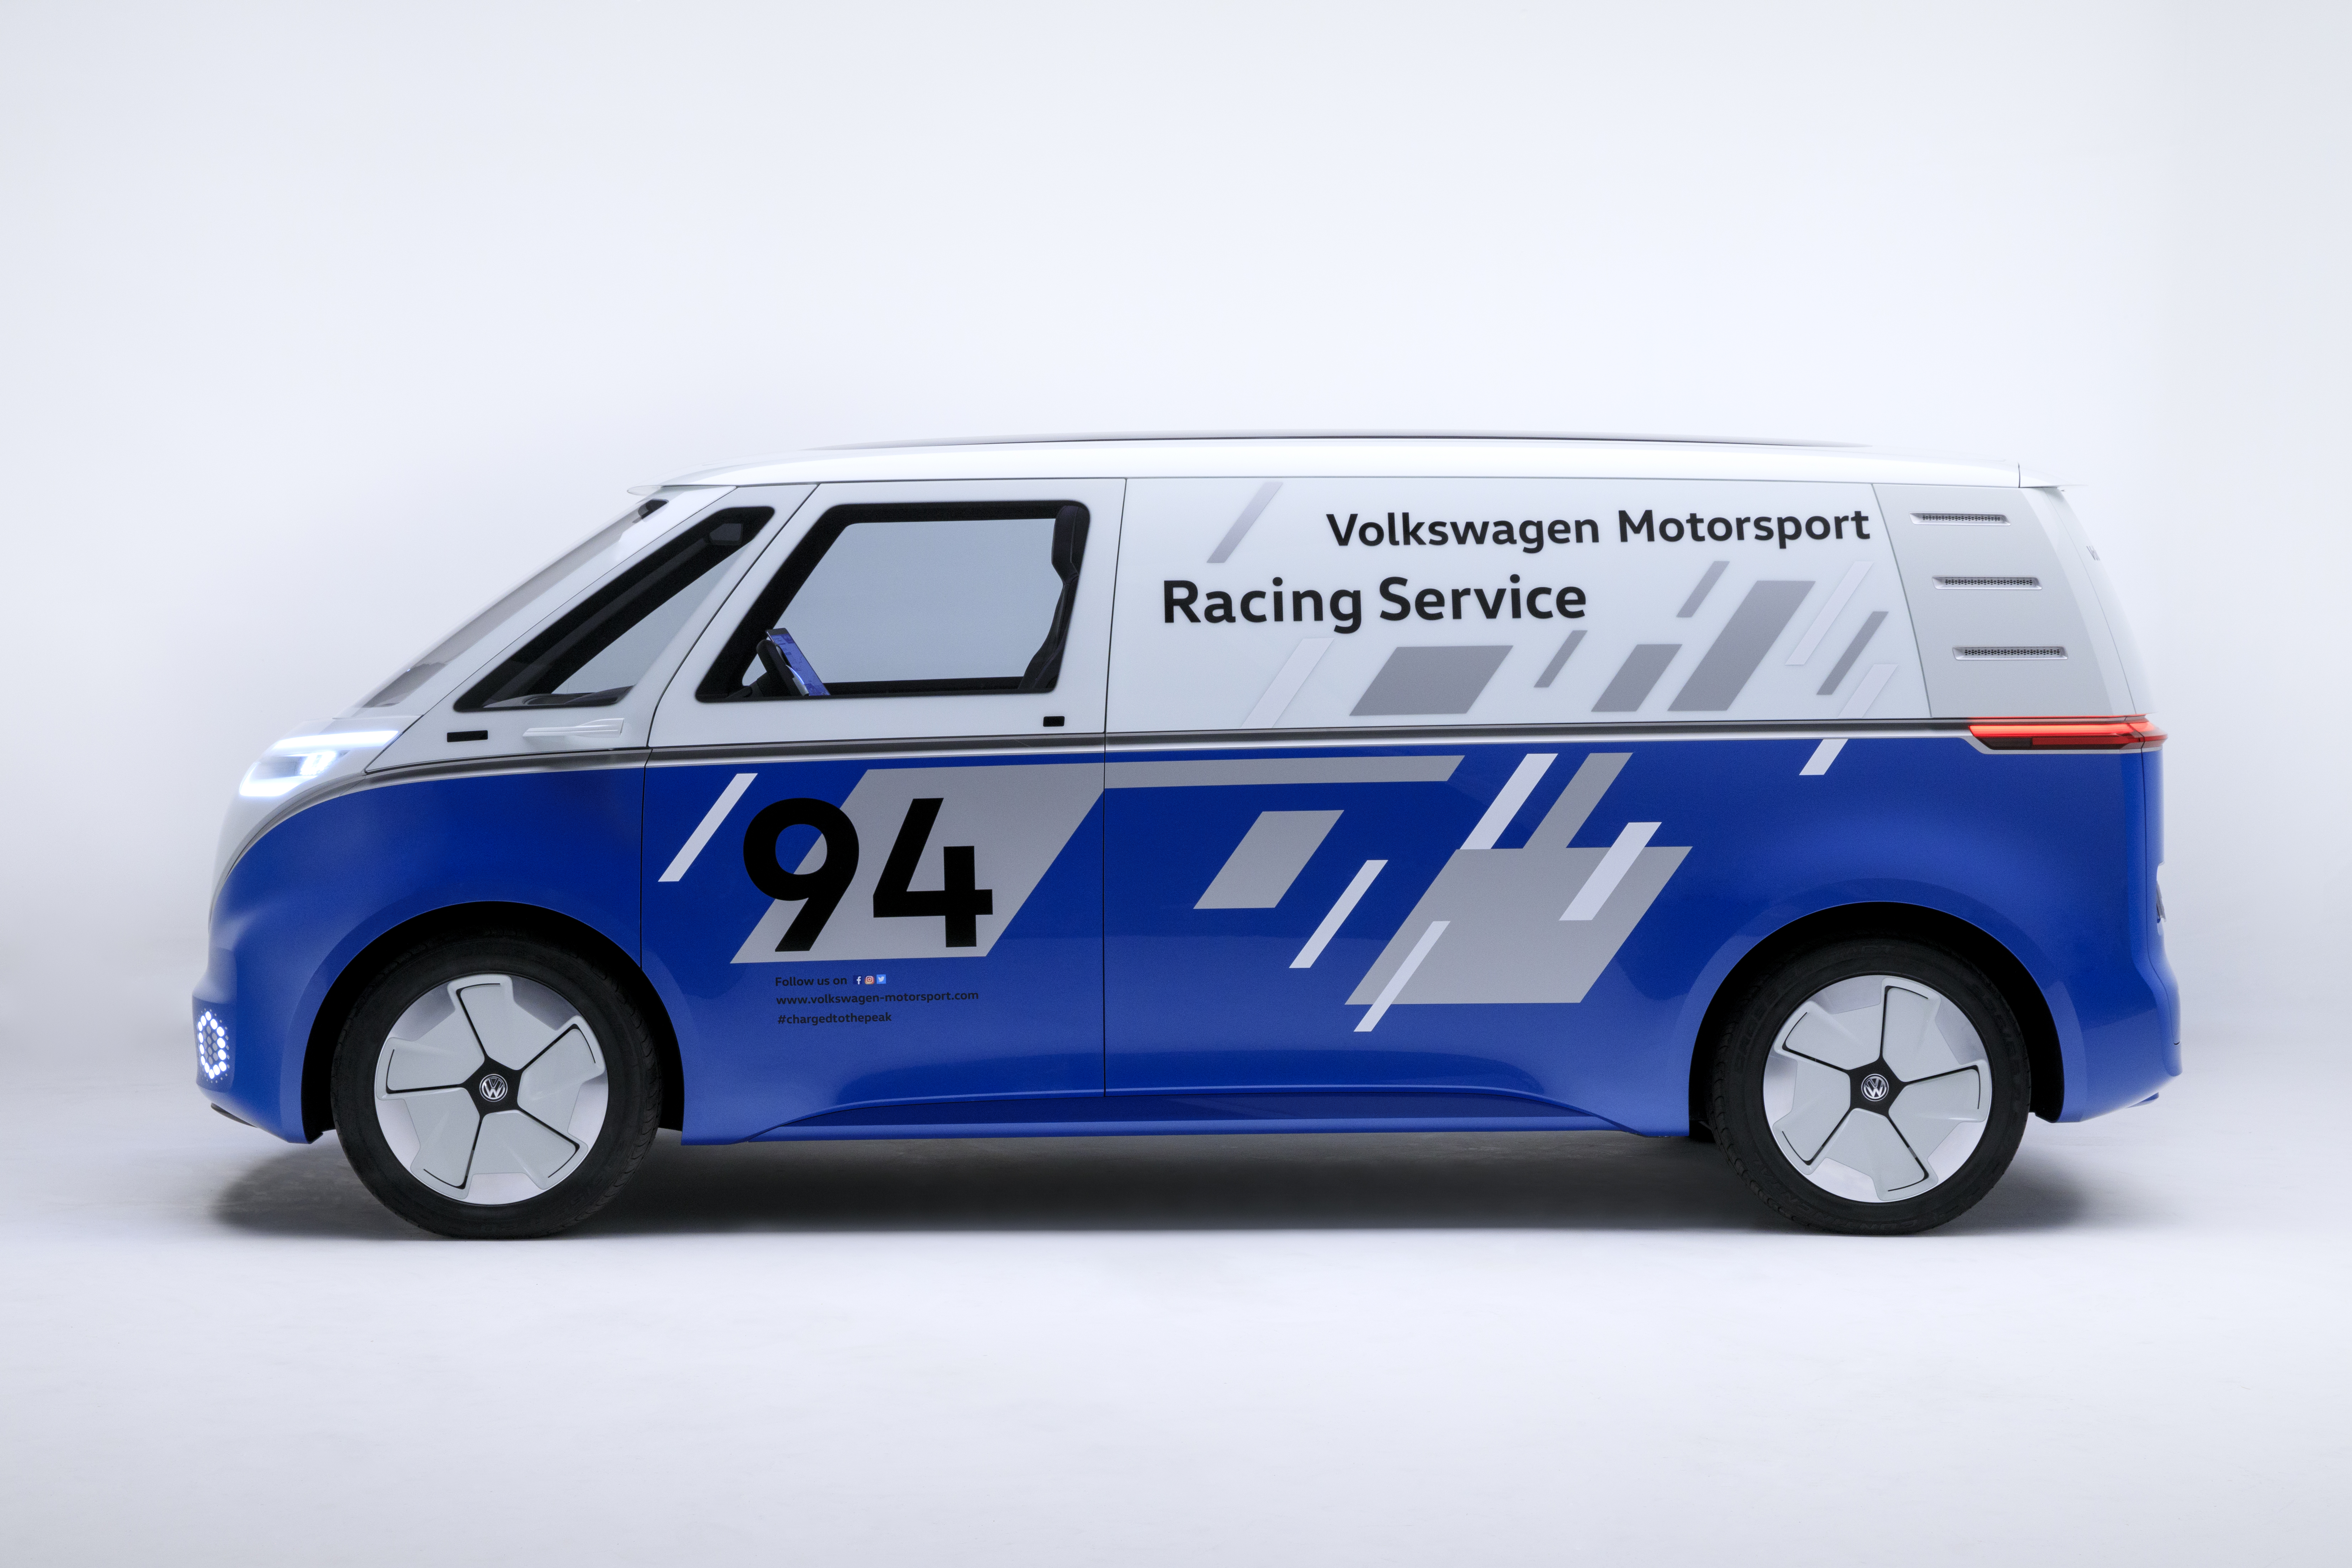 VW turned its electric cargo van concept into a race support vehicle |  TechCrunch